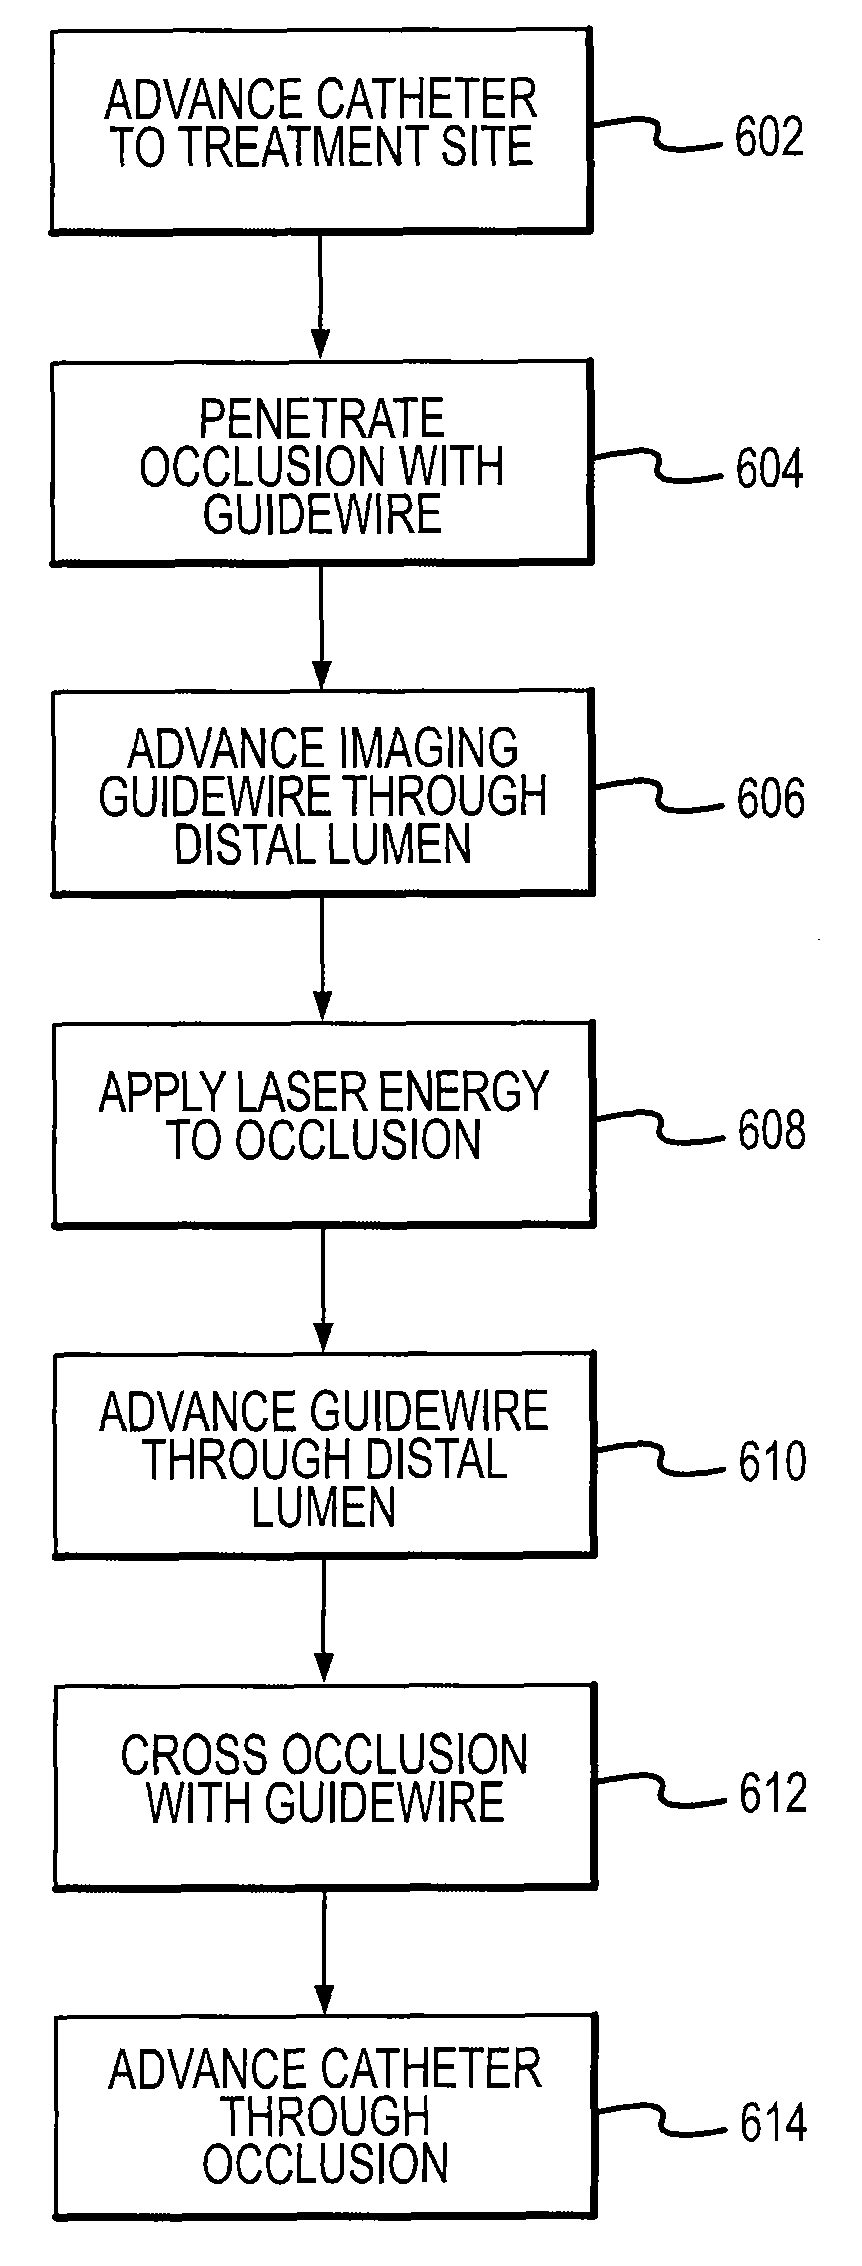 Multi-port light delivery catheter and methods for the use thereof